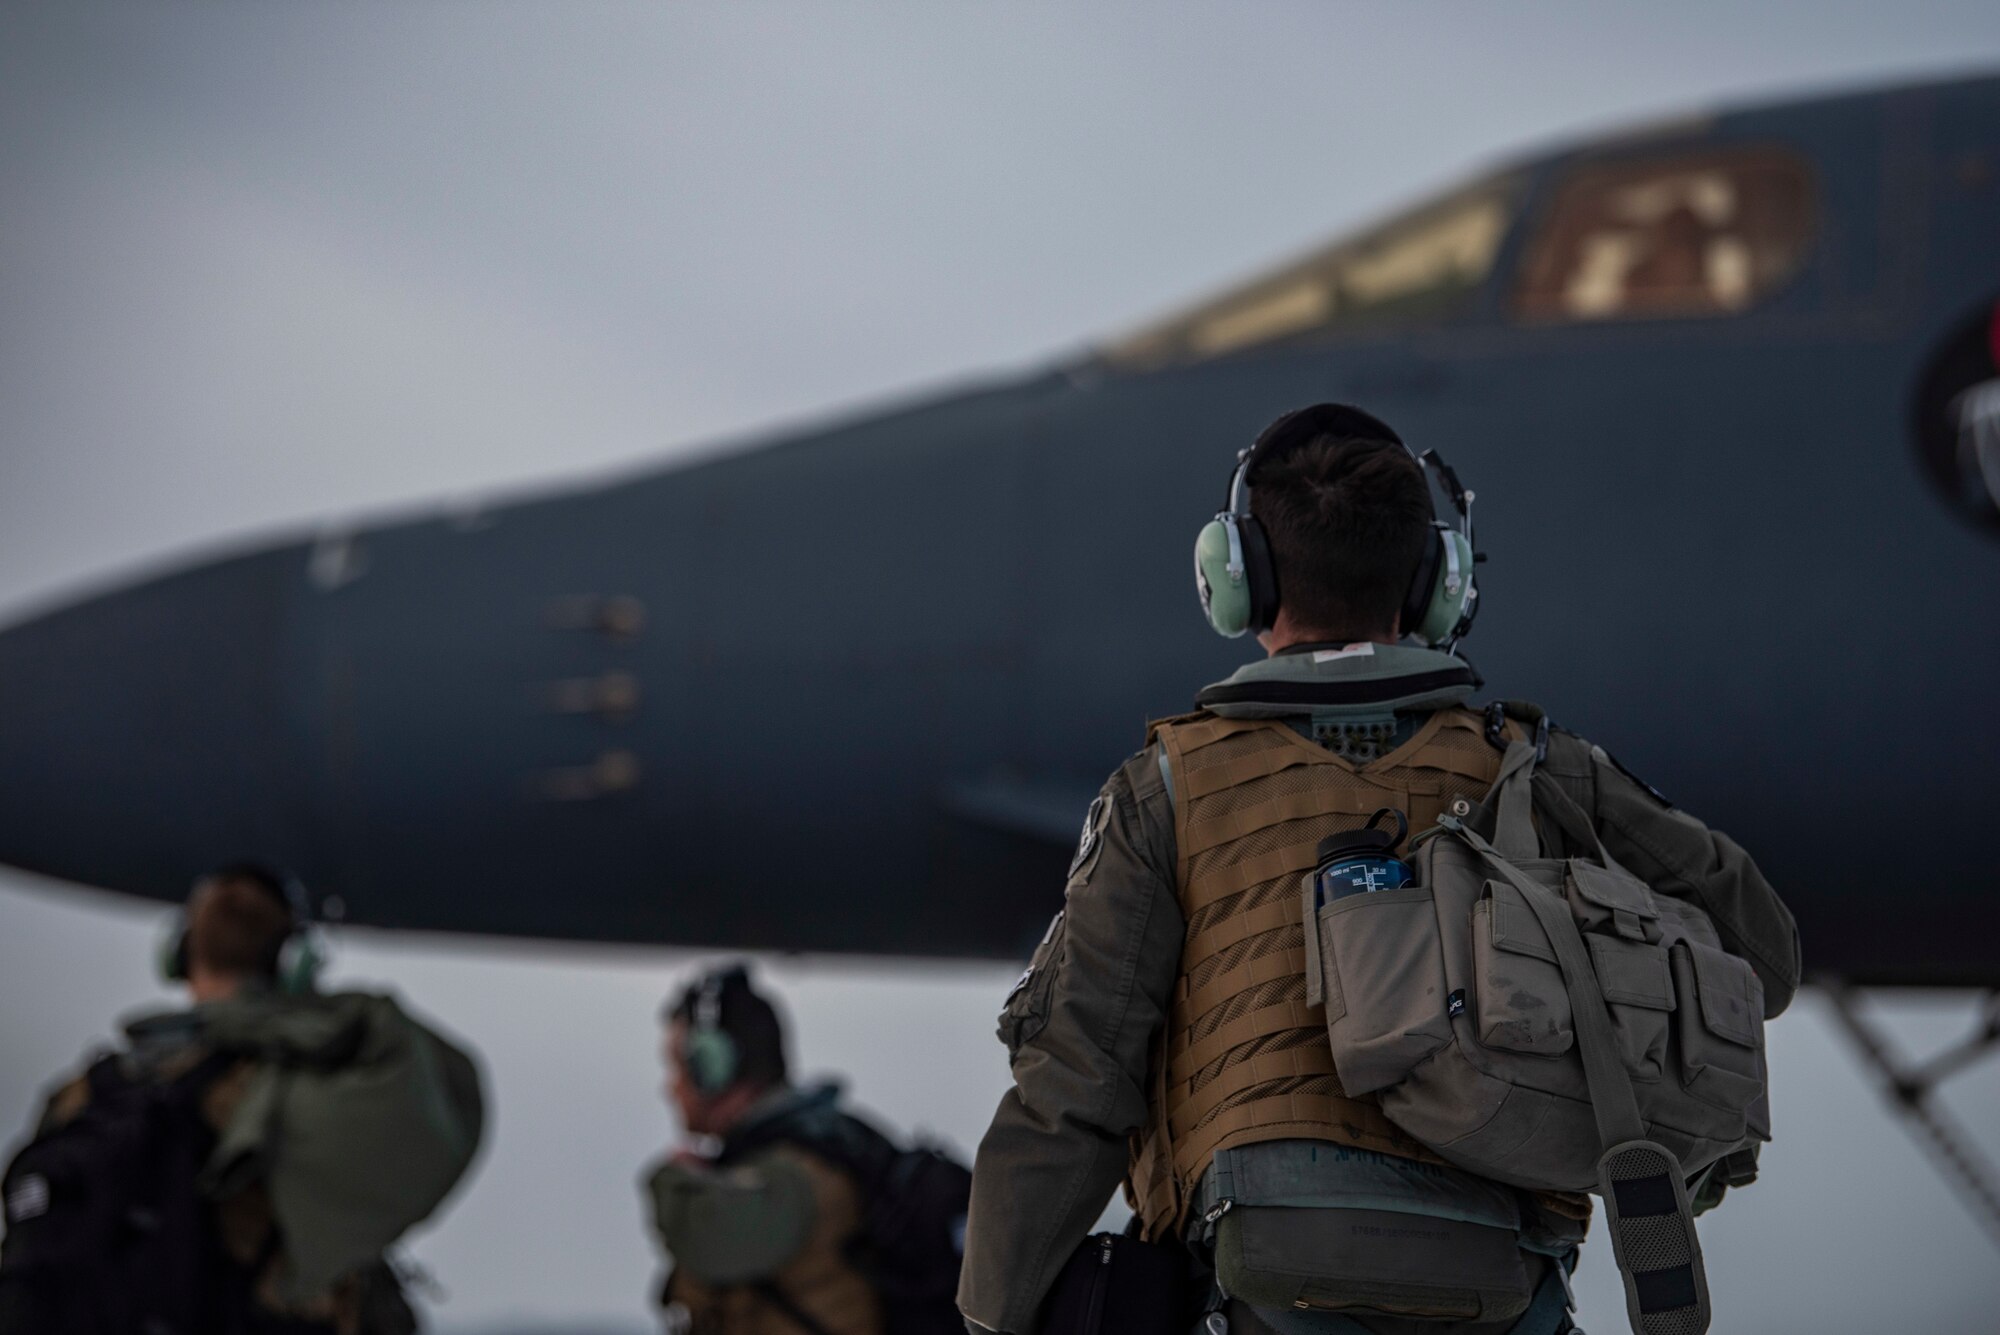 Aircrew assigned to the 9th Expeditionary Bomb Squadron prepare to board a B-1B Lancer on the flightline at Ørland Air Force Station, Norway, March 8, 2021. The aircrew participated in the Bomber Task Force Europe training mission, Agile Condor, where they conducted a warm pit ground refueling. (U.S. Air Force photo by Airman 1st Class Colin Hollowell)